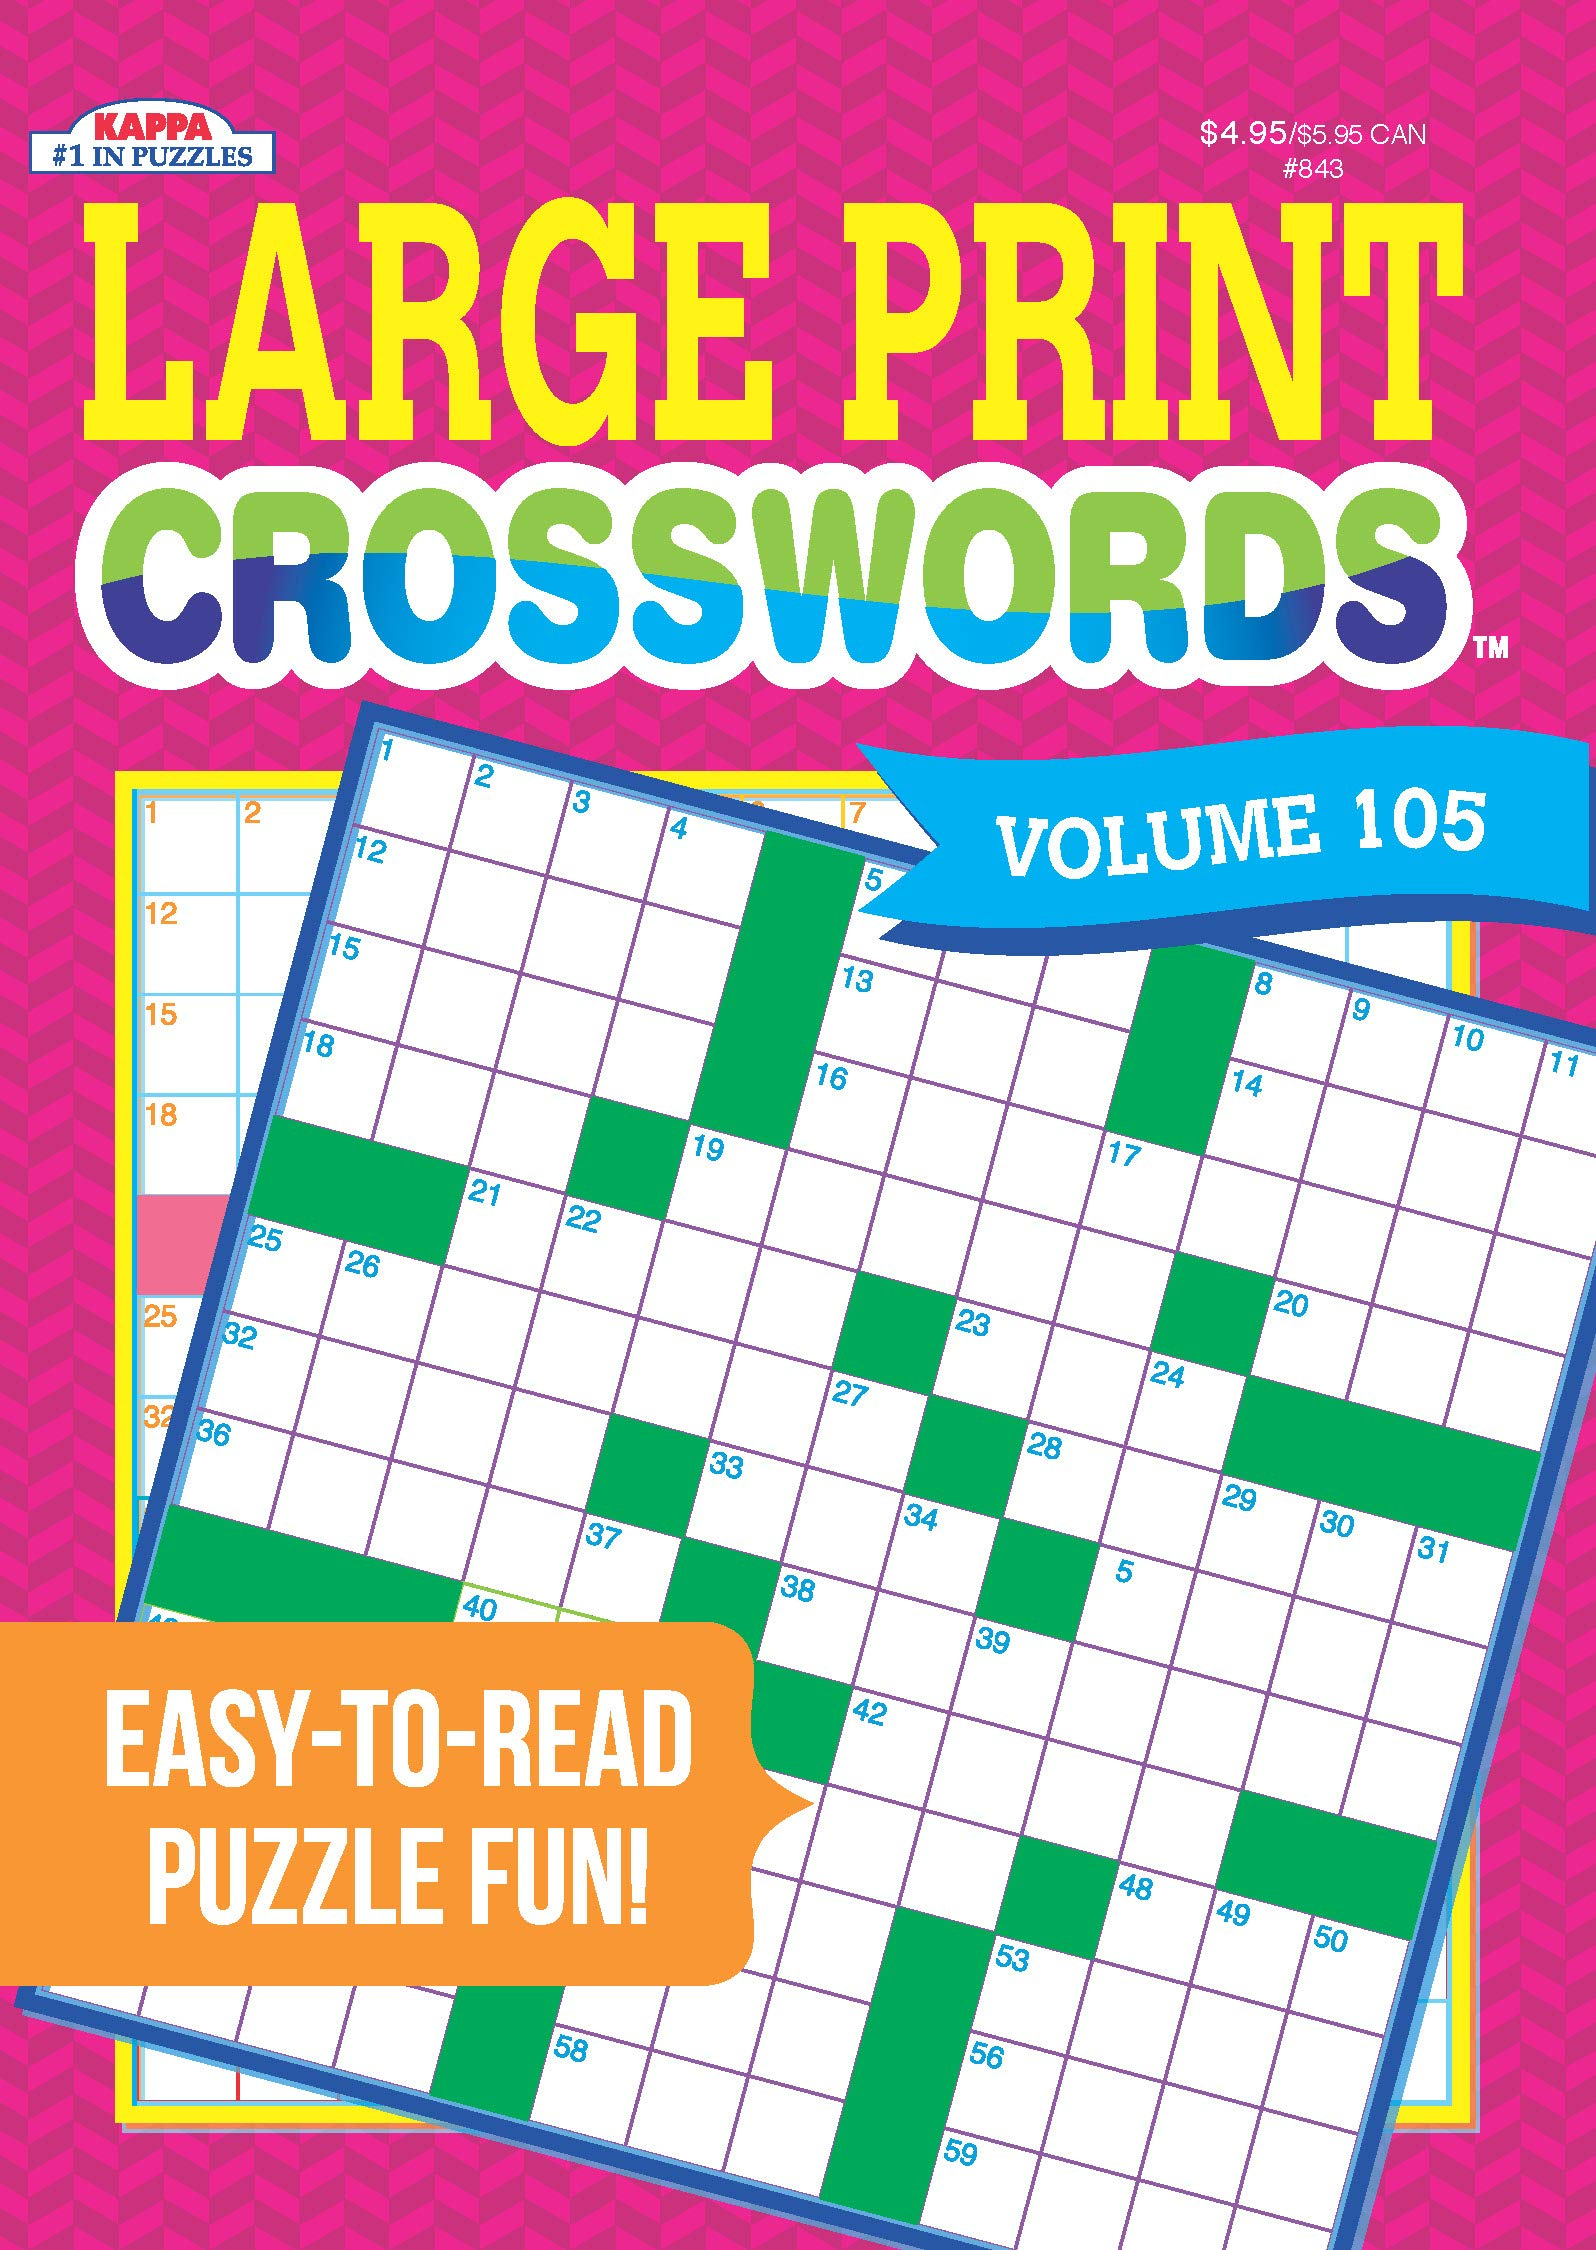 Coloring ~ Coloring Free Large Print Crosswords Easy For Seniors - Daily Crossword Puzzle Printable Thomas Joseph